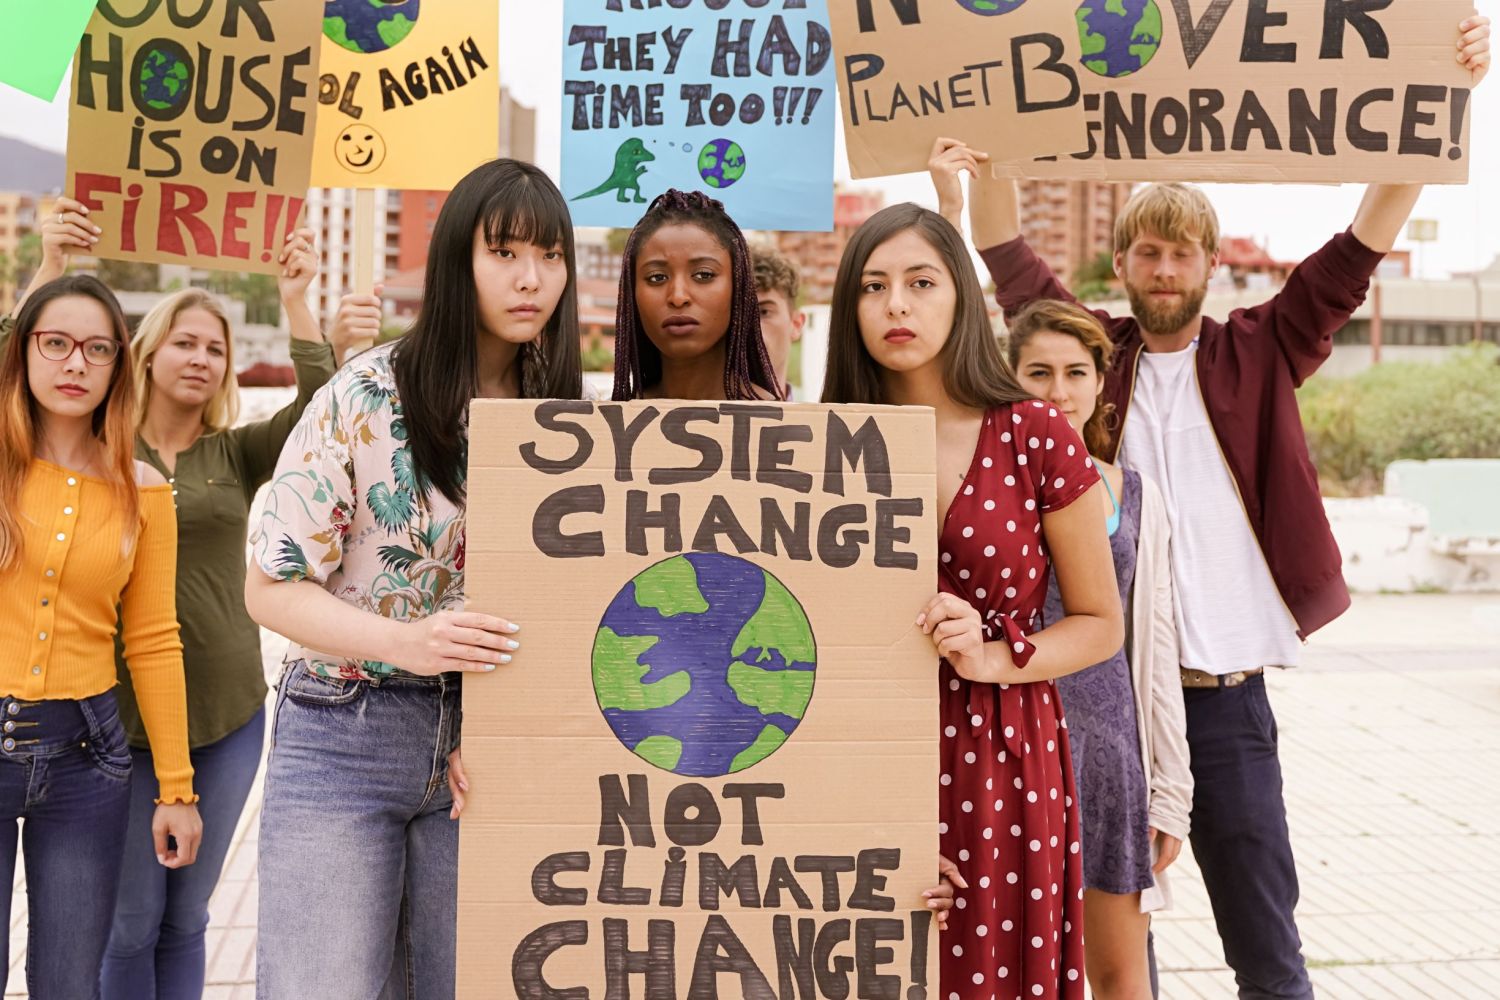 Students protesting for climate change education